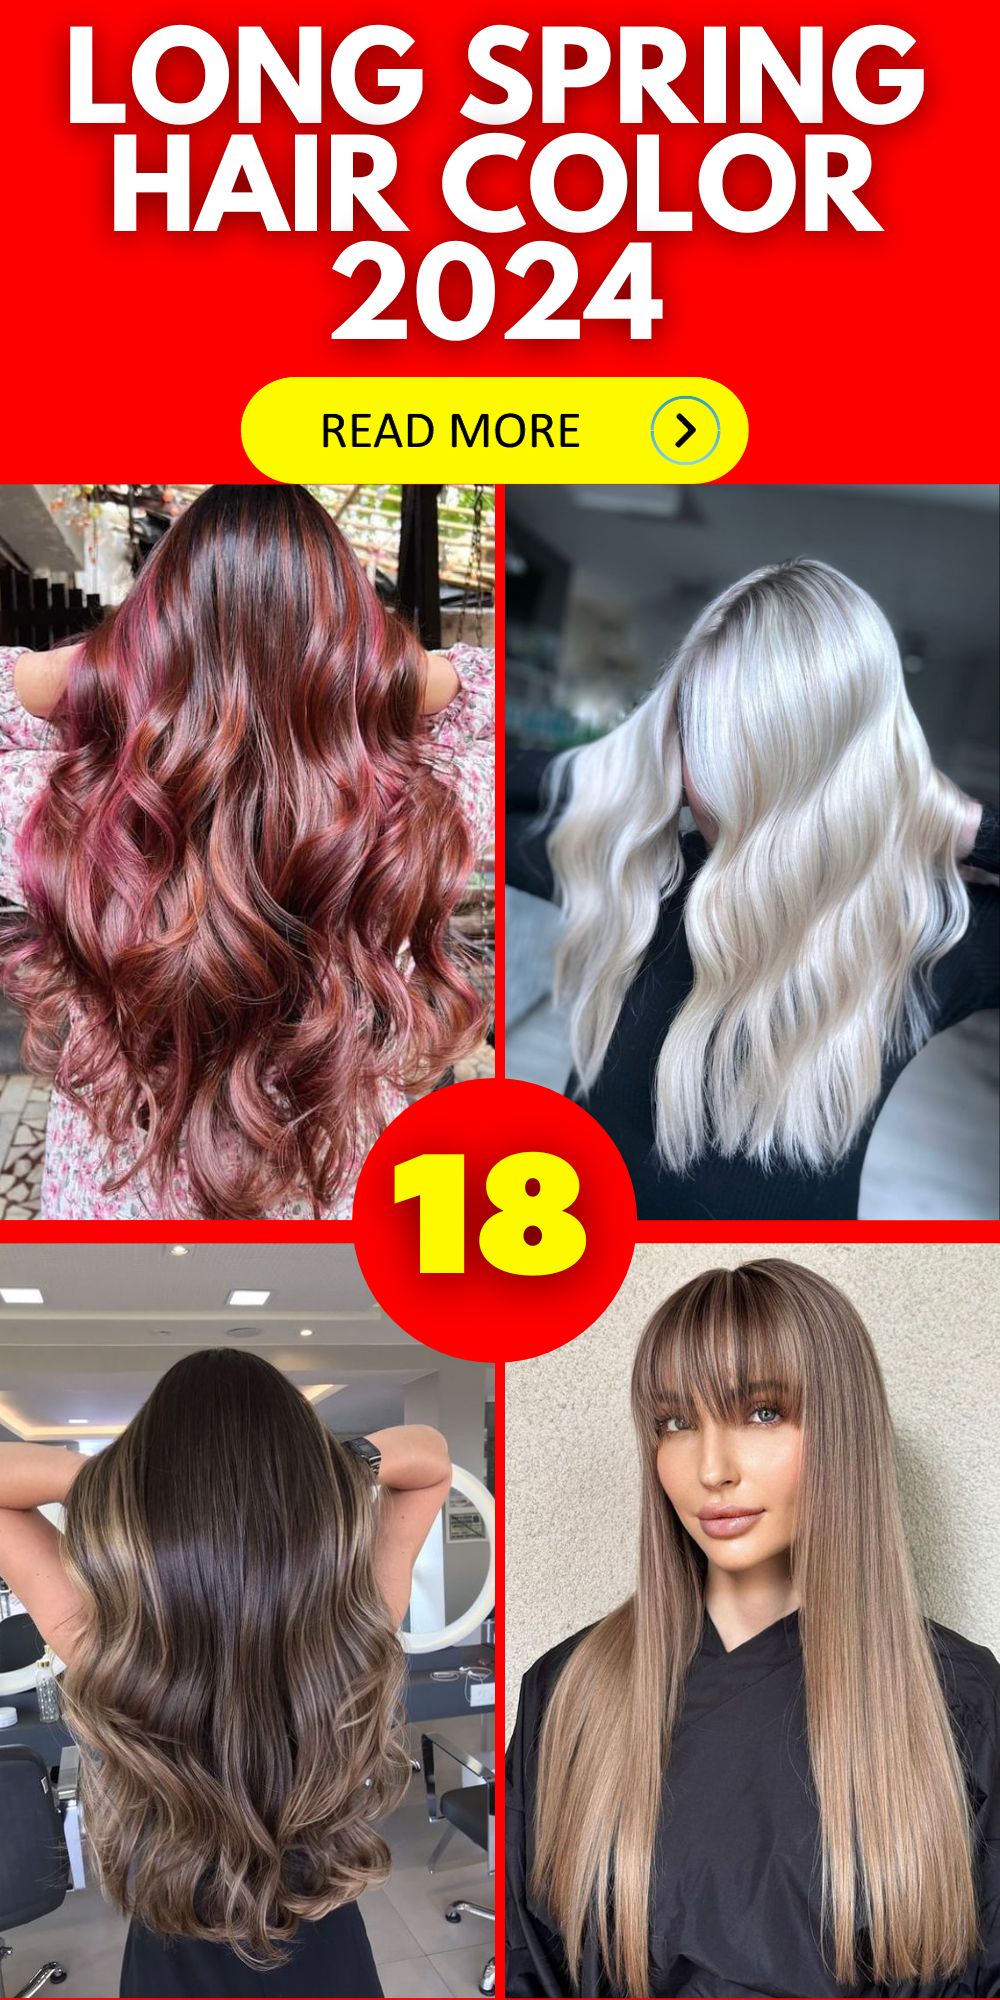 Top Long Spring Hair Colors 2024 Inspo for & Blondes Alike